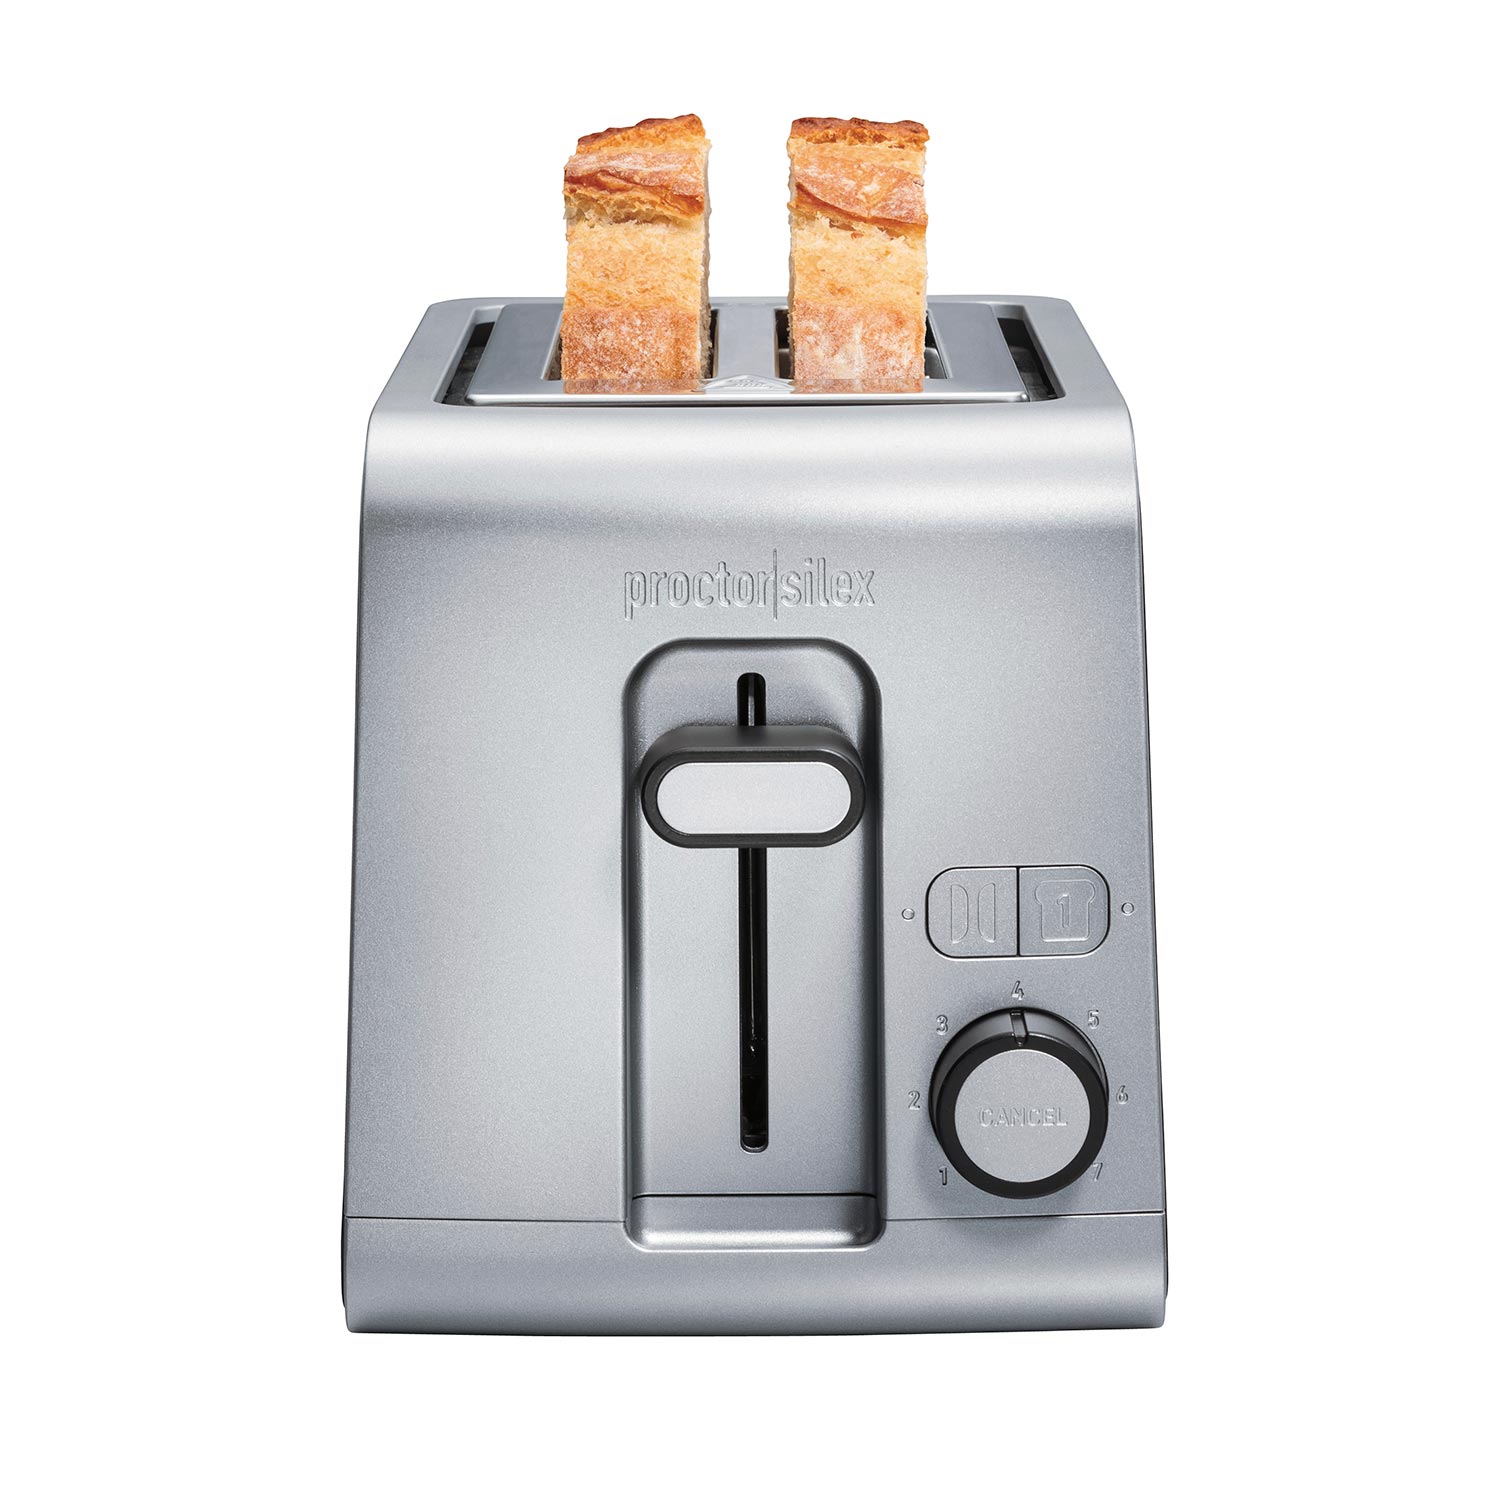 2-Slice Toaster, Silver - 22302 Small Size